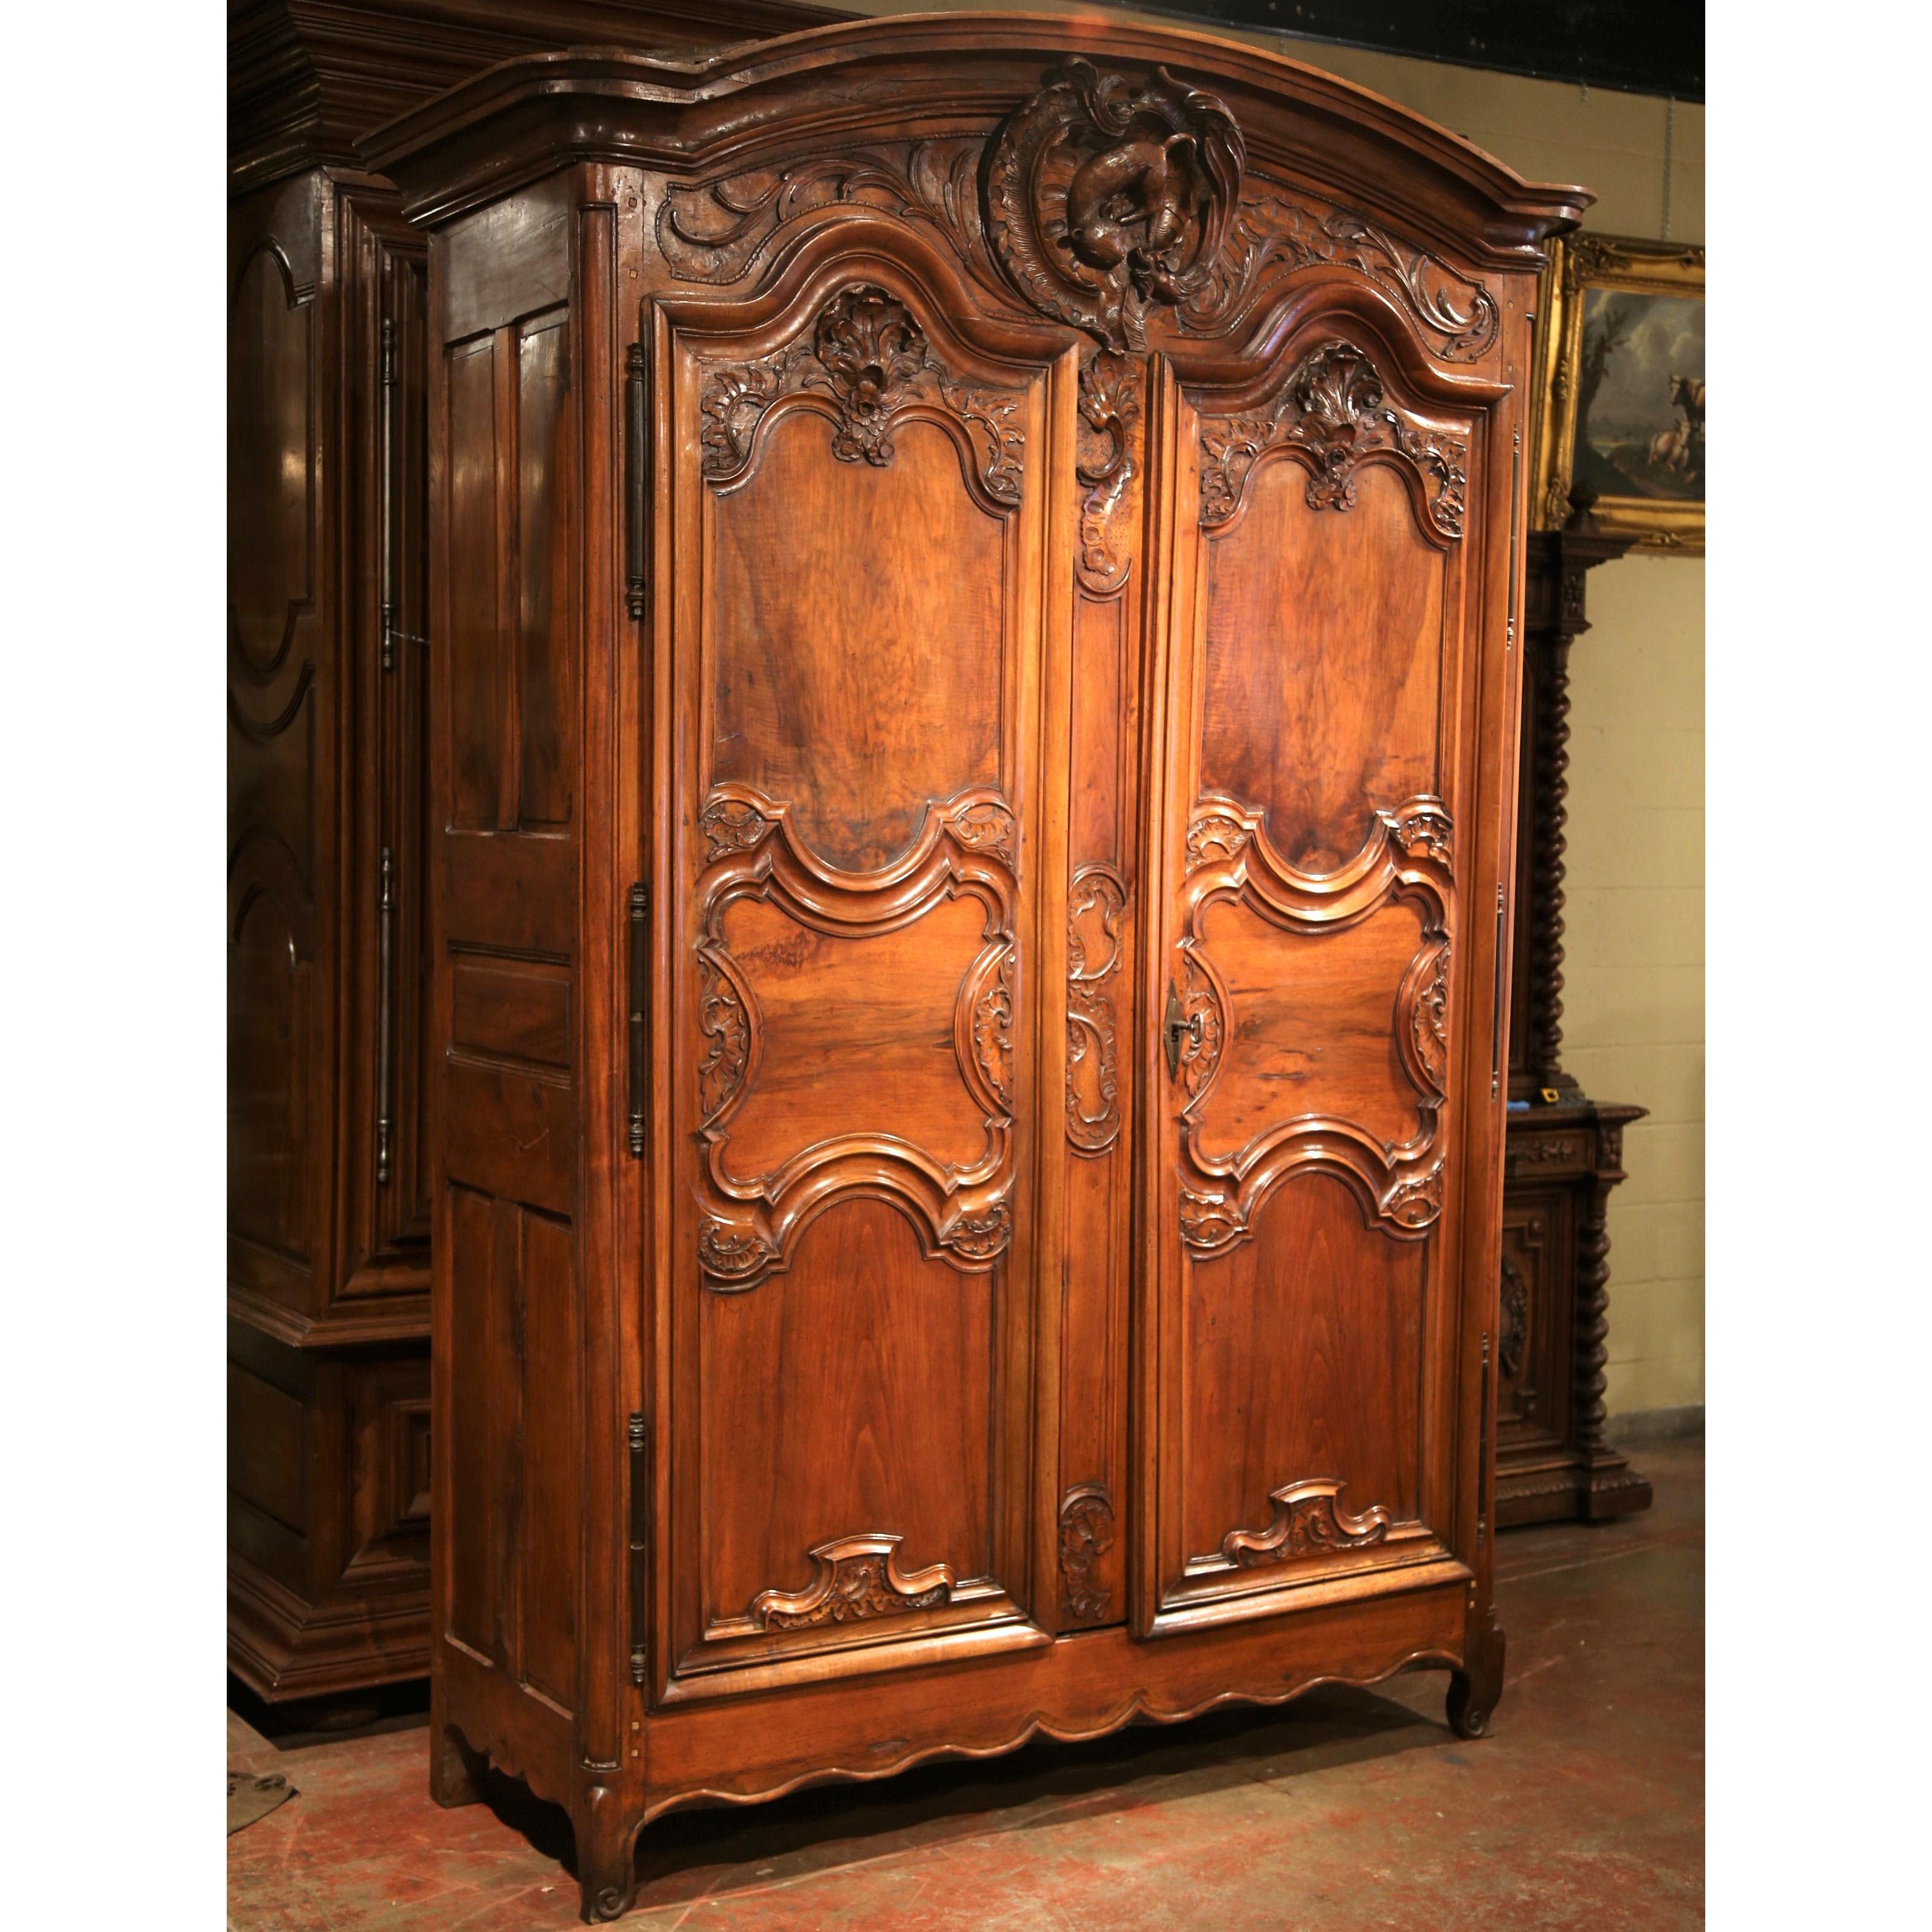 Hand-Carved 18th Century French Louis XV Carved Walnut Two-Door Armoire from Lyon